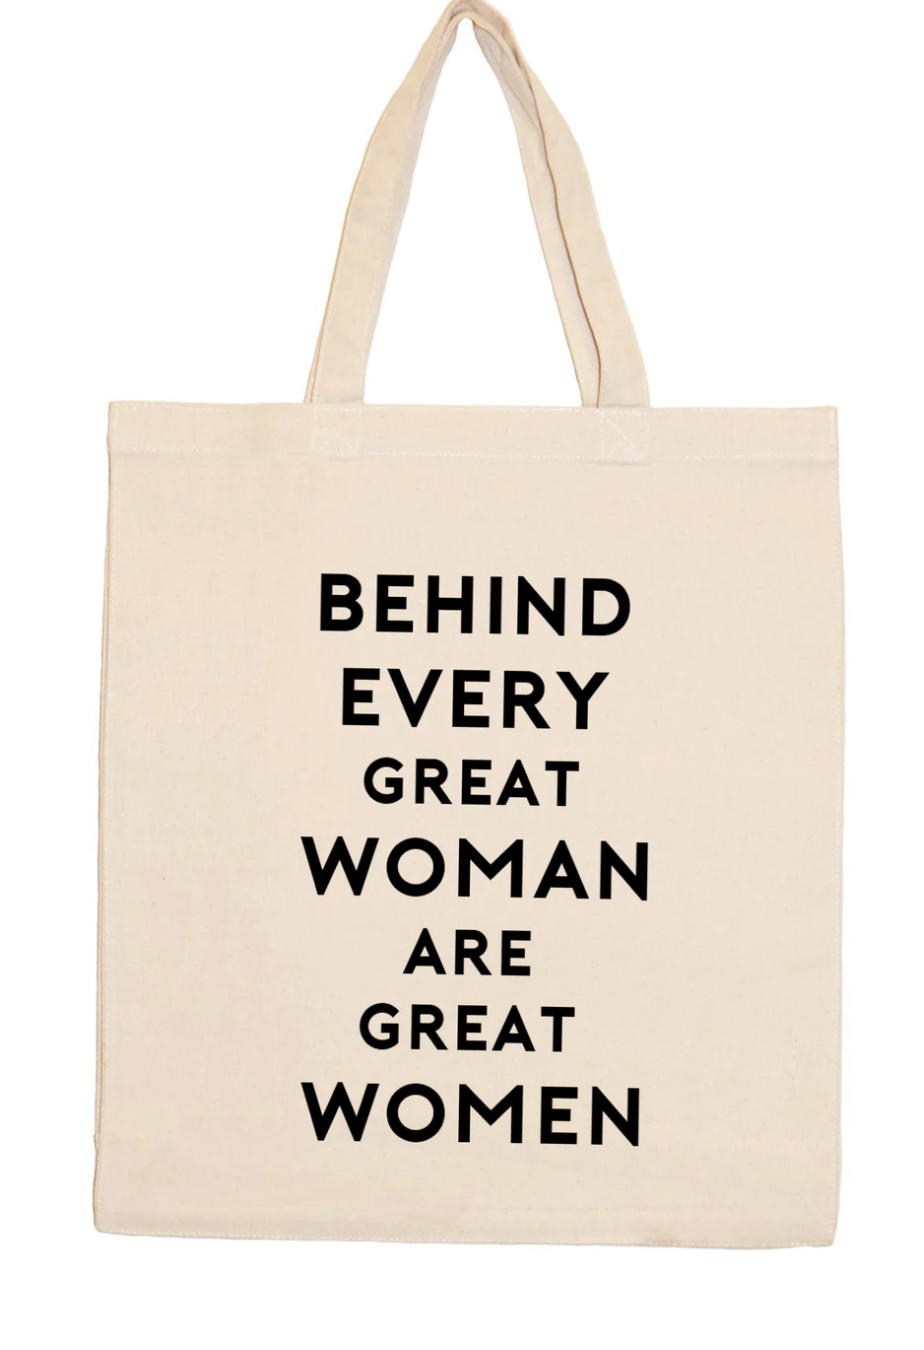 Every Great Woman Eco-Friendly Natural Canvas Tote Bag